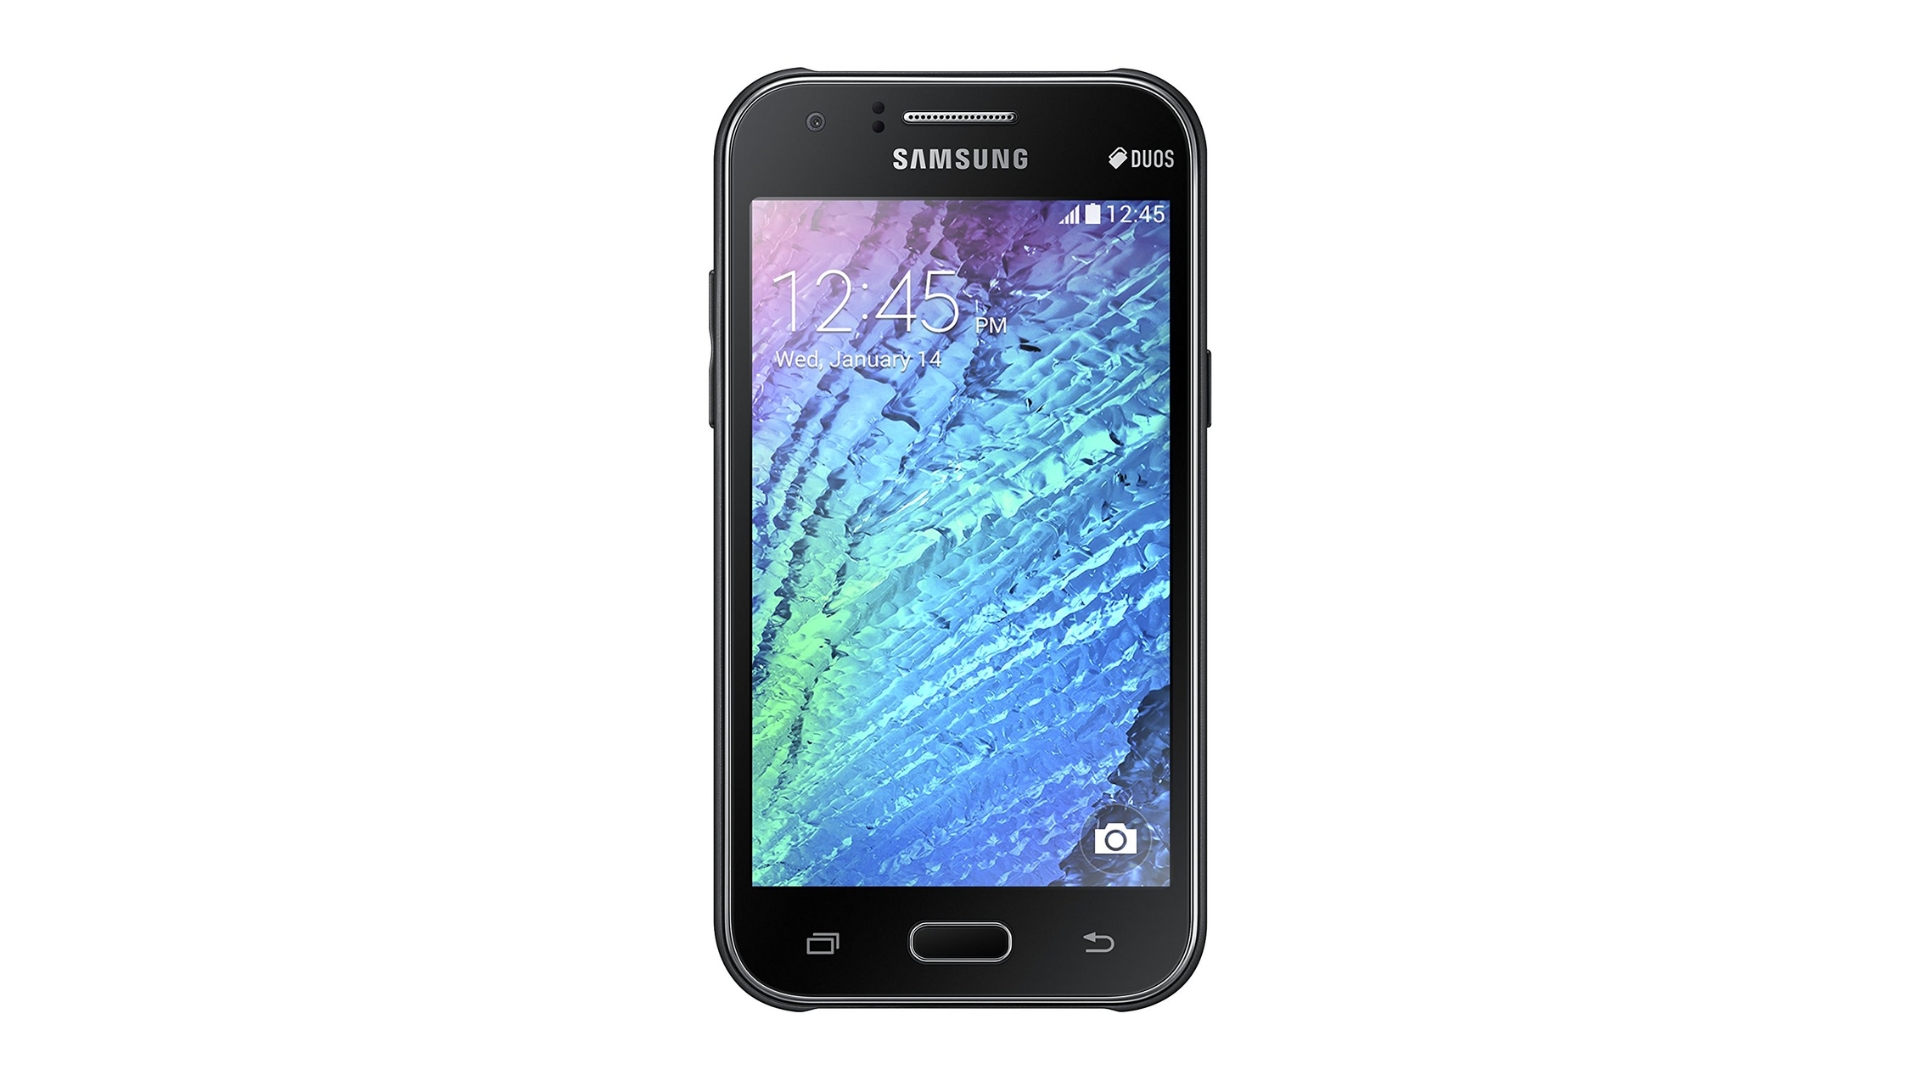 Leaked Hardware Specs of Samsung Galaxy J1 (SM-J100) Suggest an Entry-Level Device